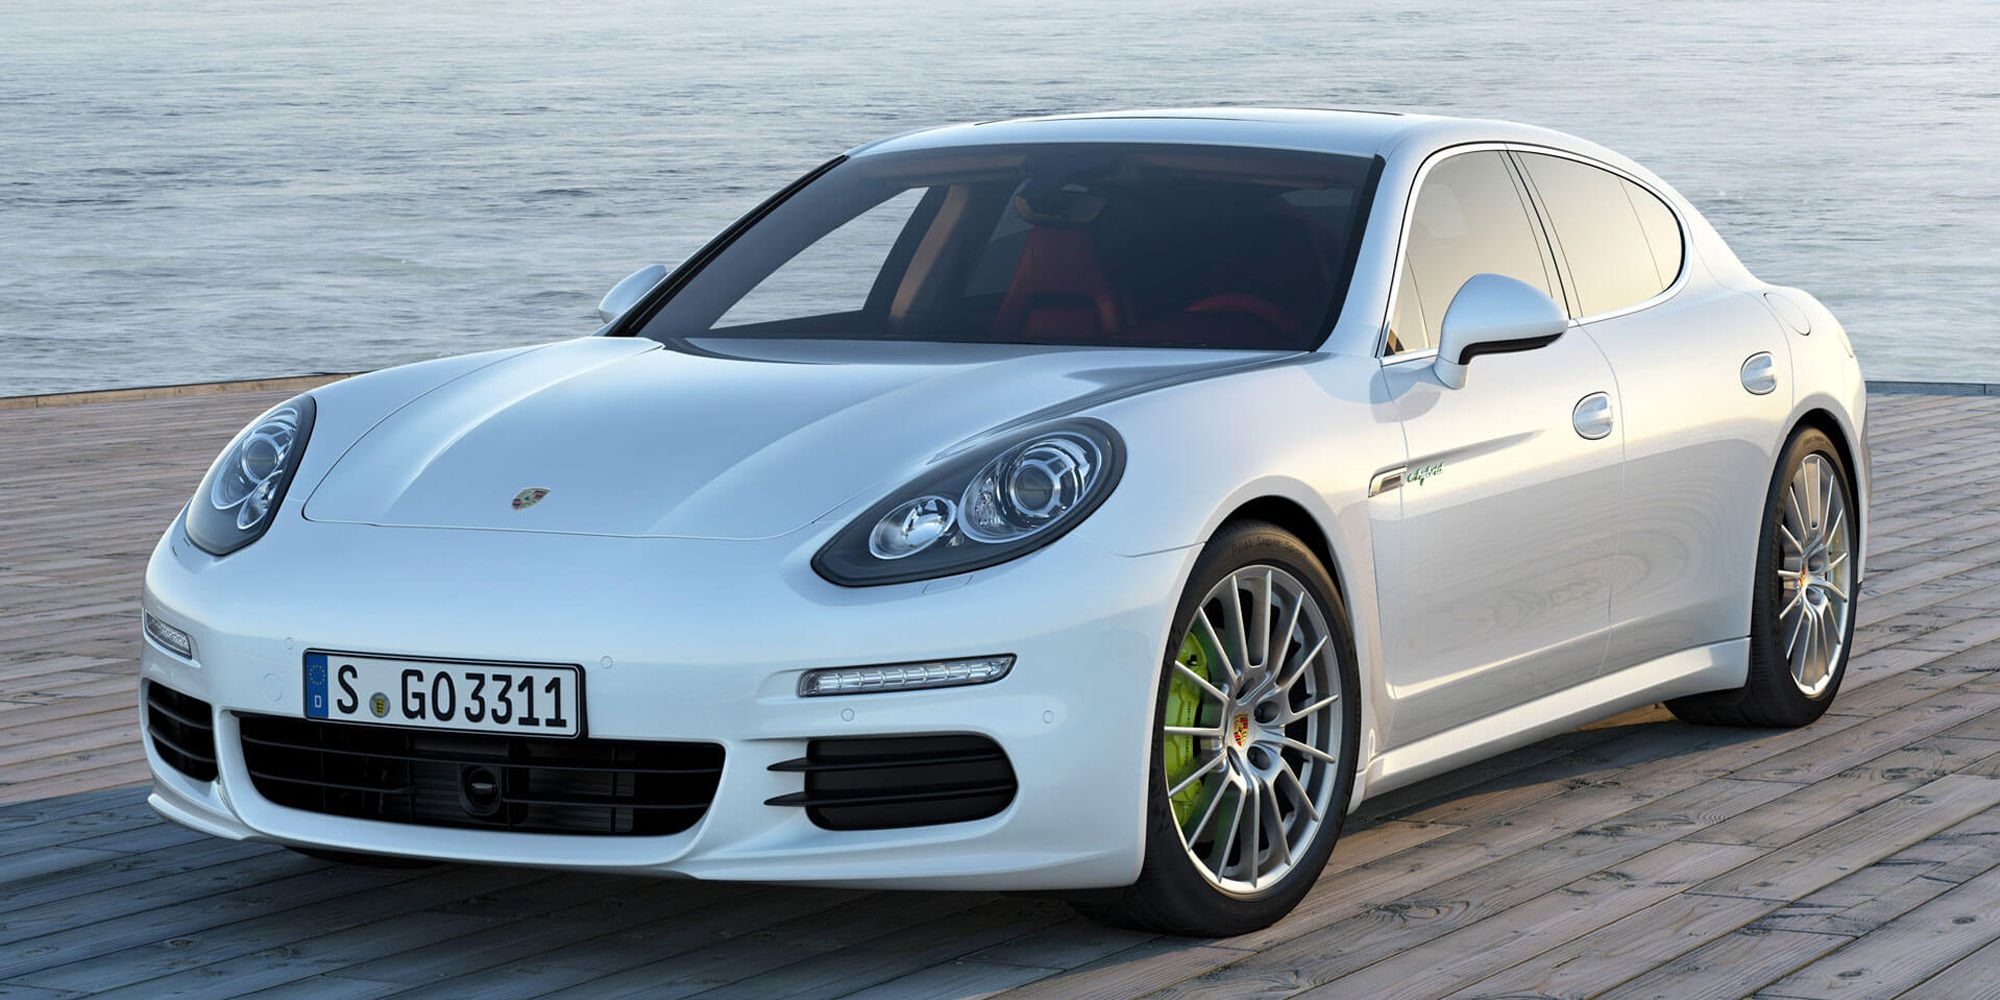 The front of the first gen Panamera